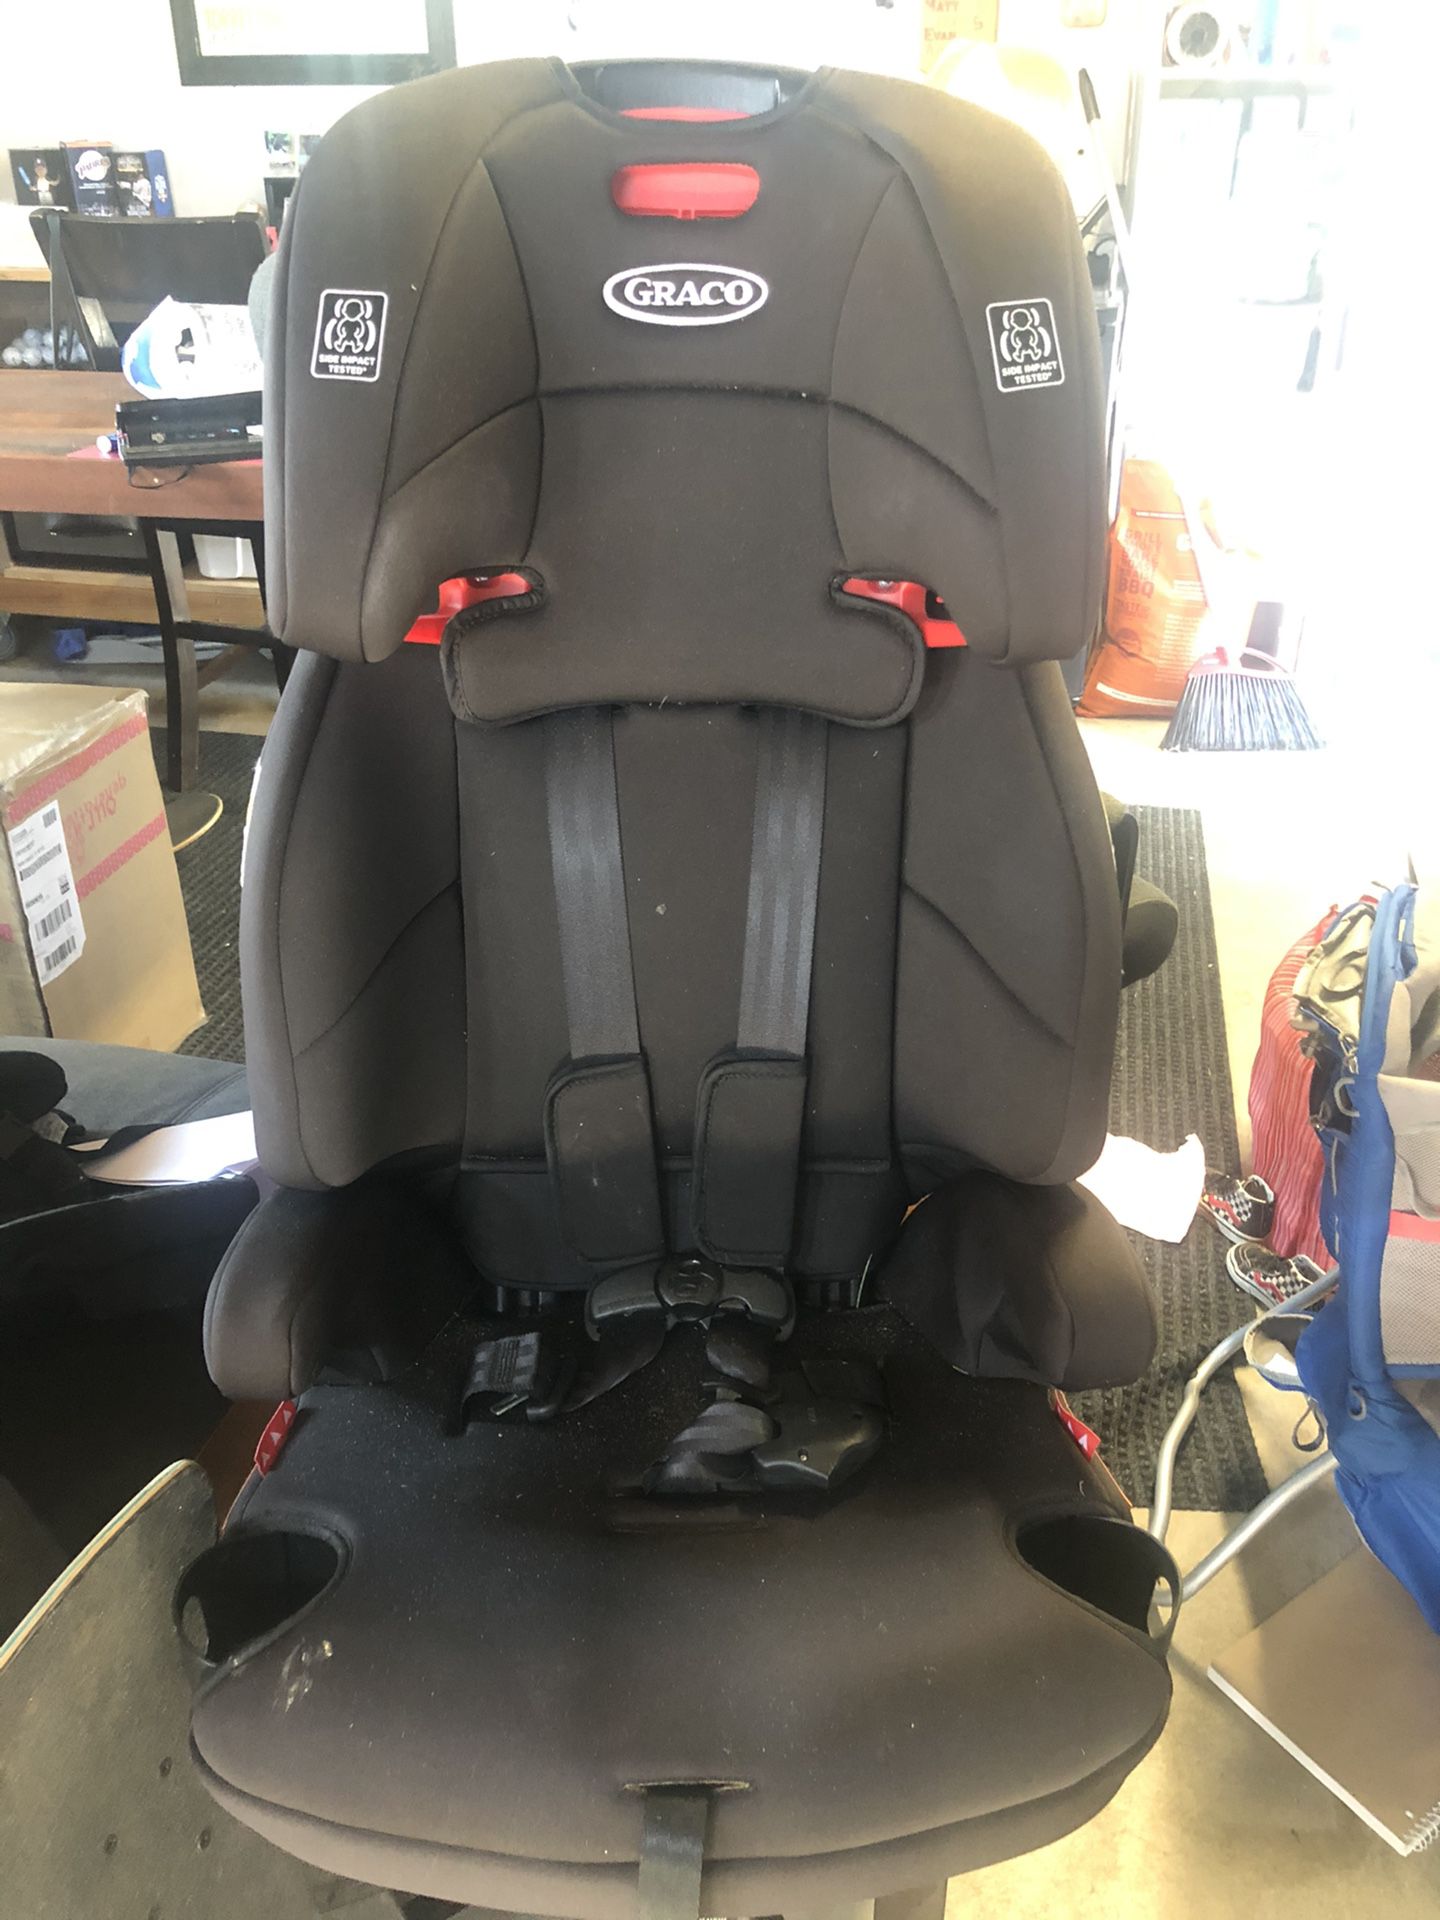 Graco Transitionz 3-in-1 Harness Booster Seat - Car Seat